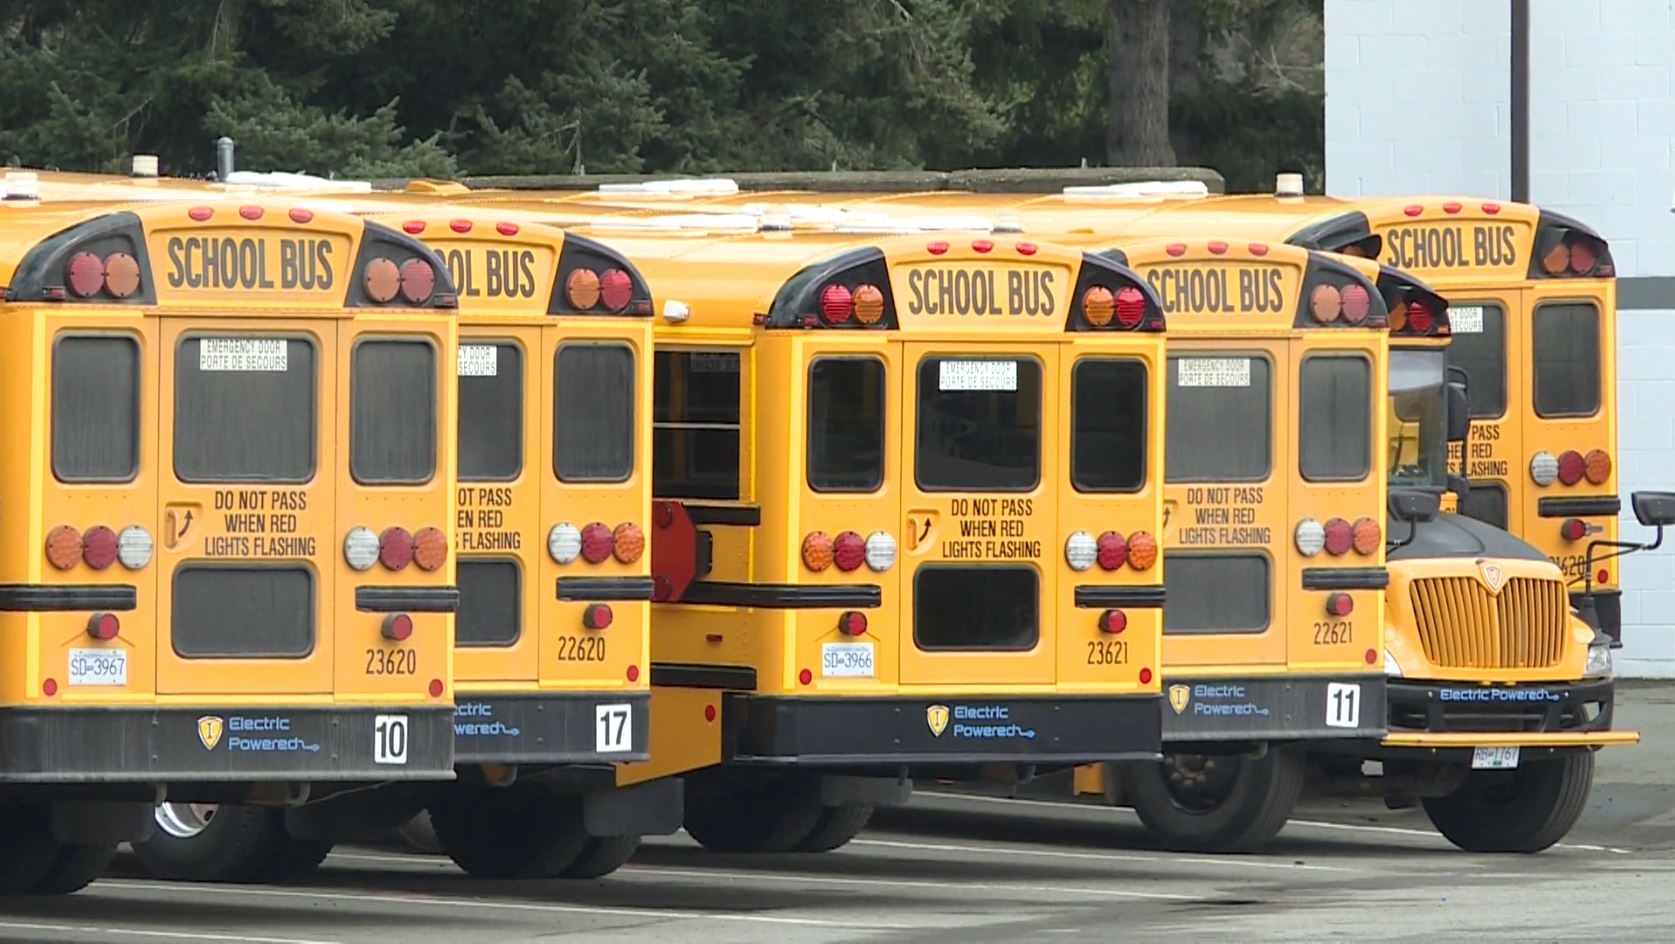 Toyotas, RVs and nearly 3K school buses: A list of